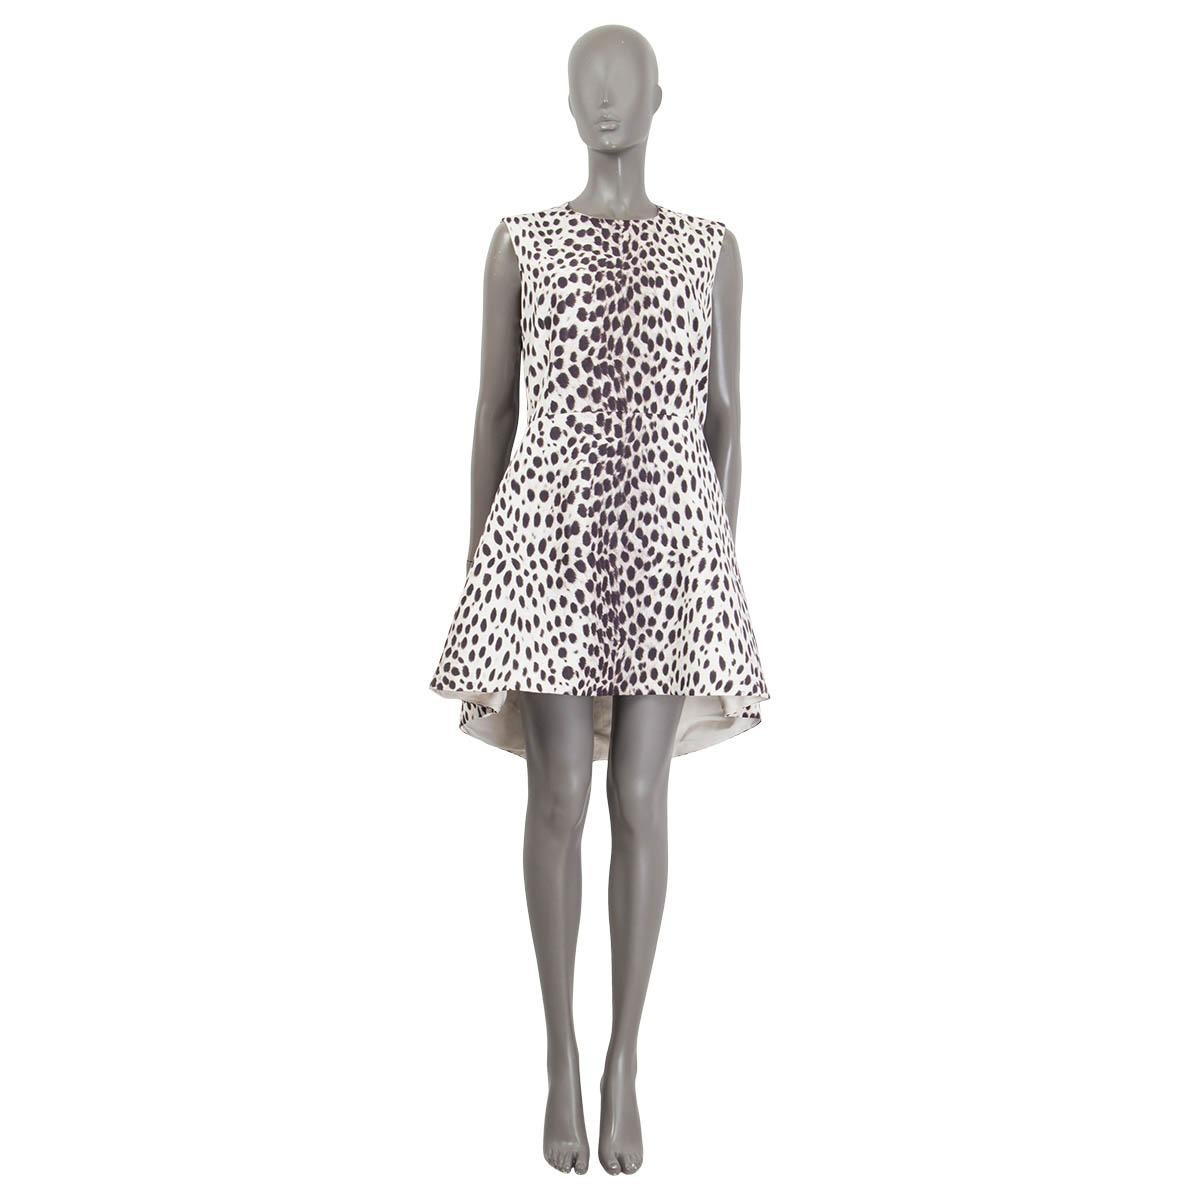 100% authentic Christian Dior cheetah print a-line dress in off-white, black and gray cotton and viscose (assumed as content tag is no longer legible). Features two slit pockets at the sides and an asymmetric fit. Opens with a concealed zipper and a